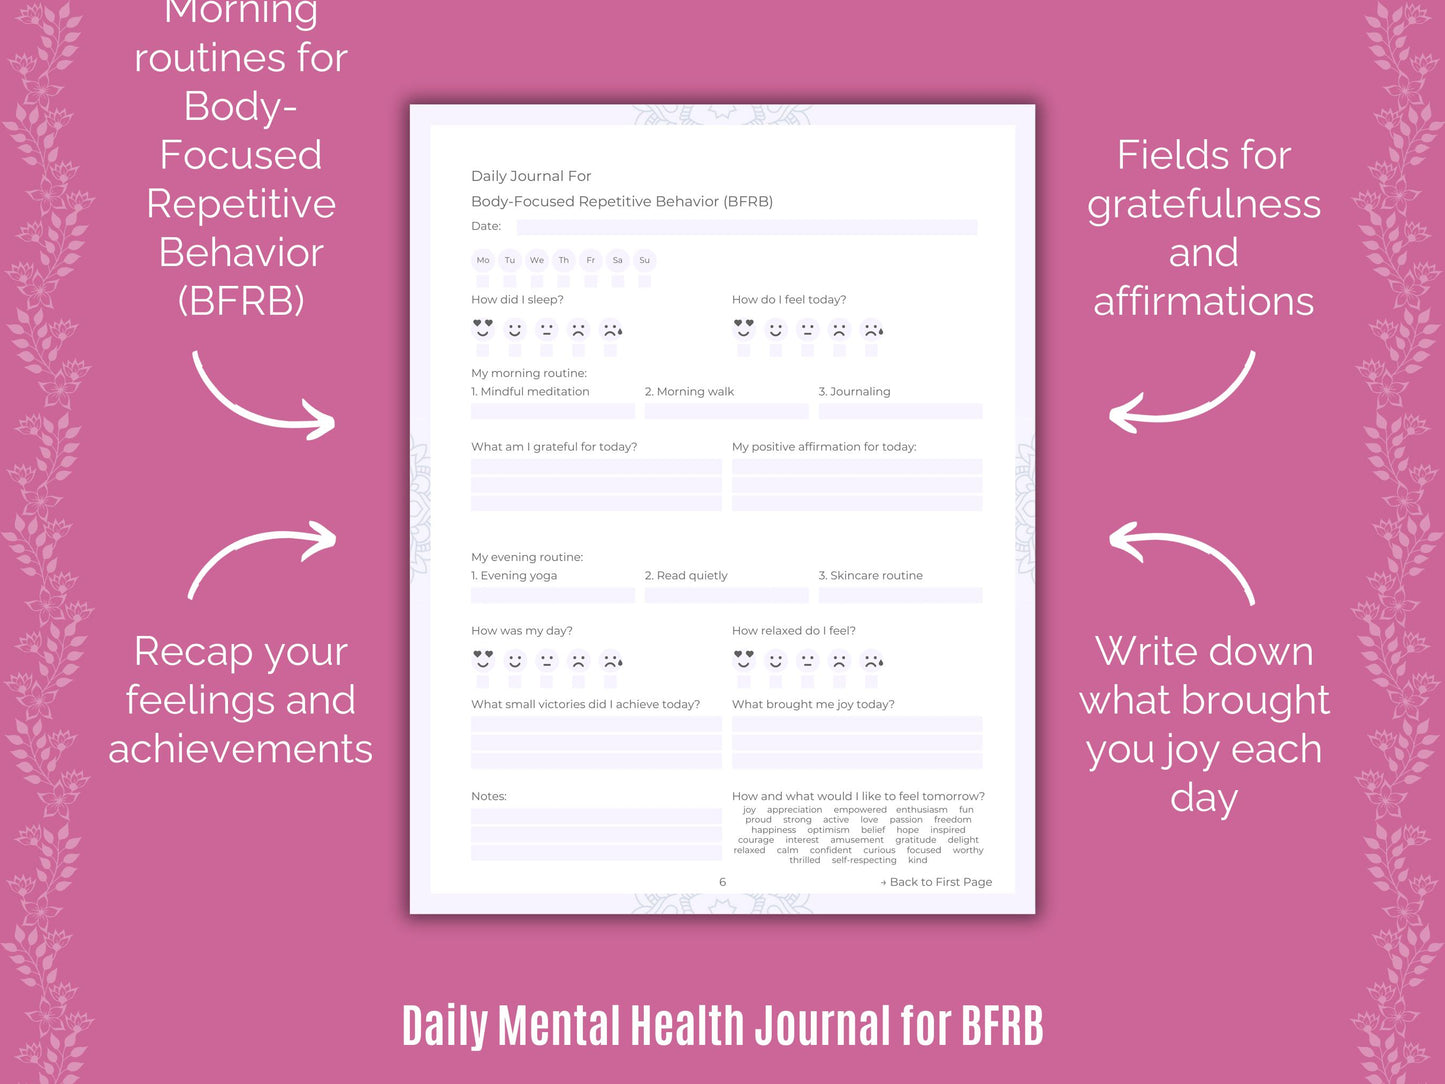 Repetitive, BFRB Counseling, BFRB Journals, BFRB Templates, BFRB Planners, Body-Focused, BFRB Therapy, BFRB Goal Setting, BFRB Resources, BFRB Workbooks, BFRB Tools, BFRB Notes, BFRB Journaling, BFRB Cheat Sheet, BFRB Mental Health, Behavior